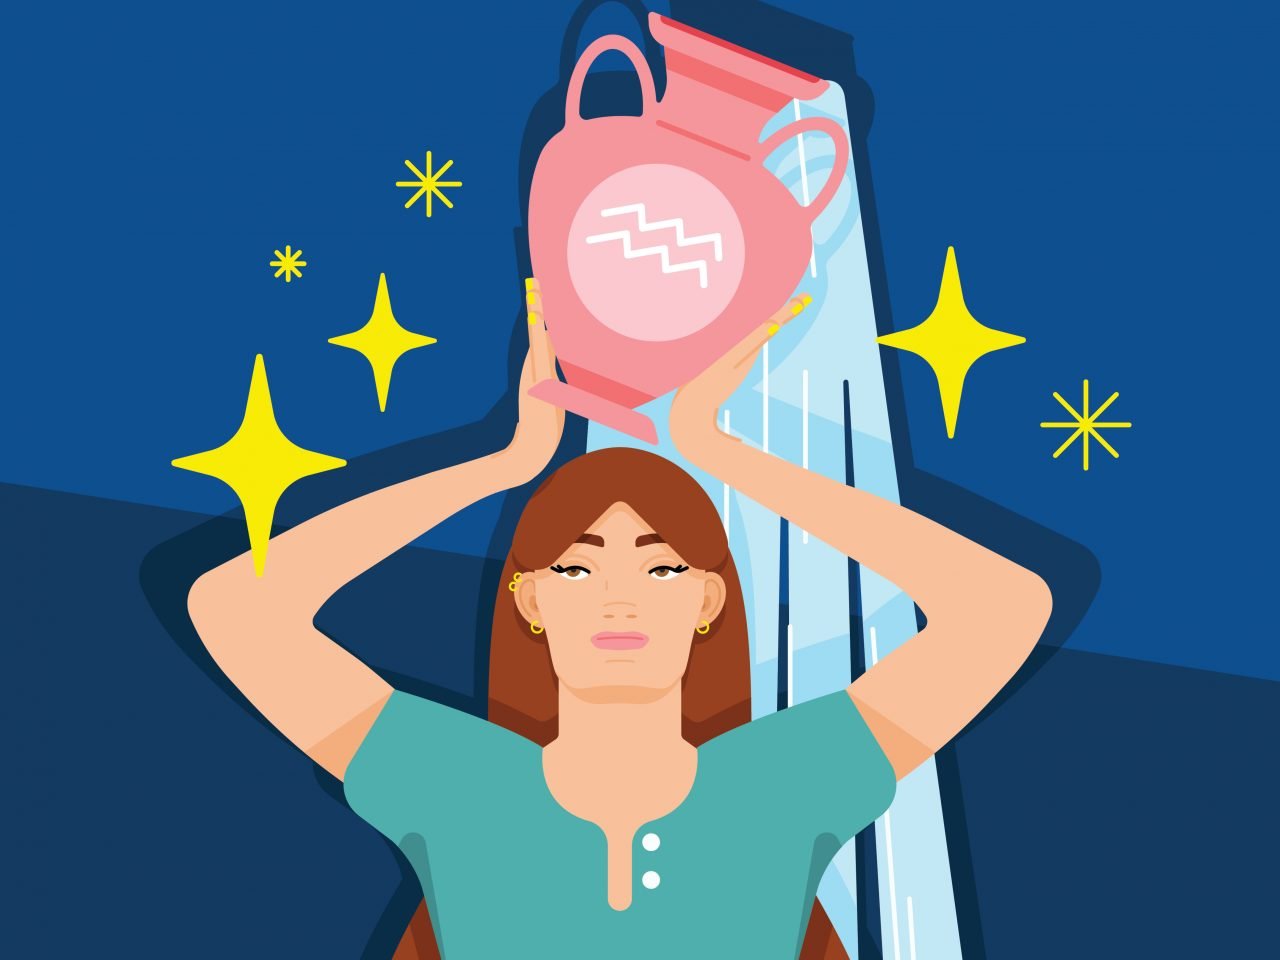 woman holding overflowing water jug over her head represents aquarius astrological sign